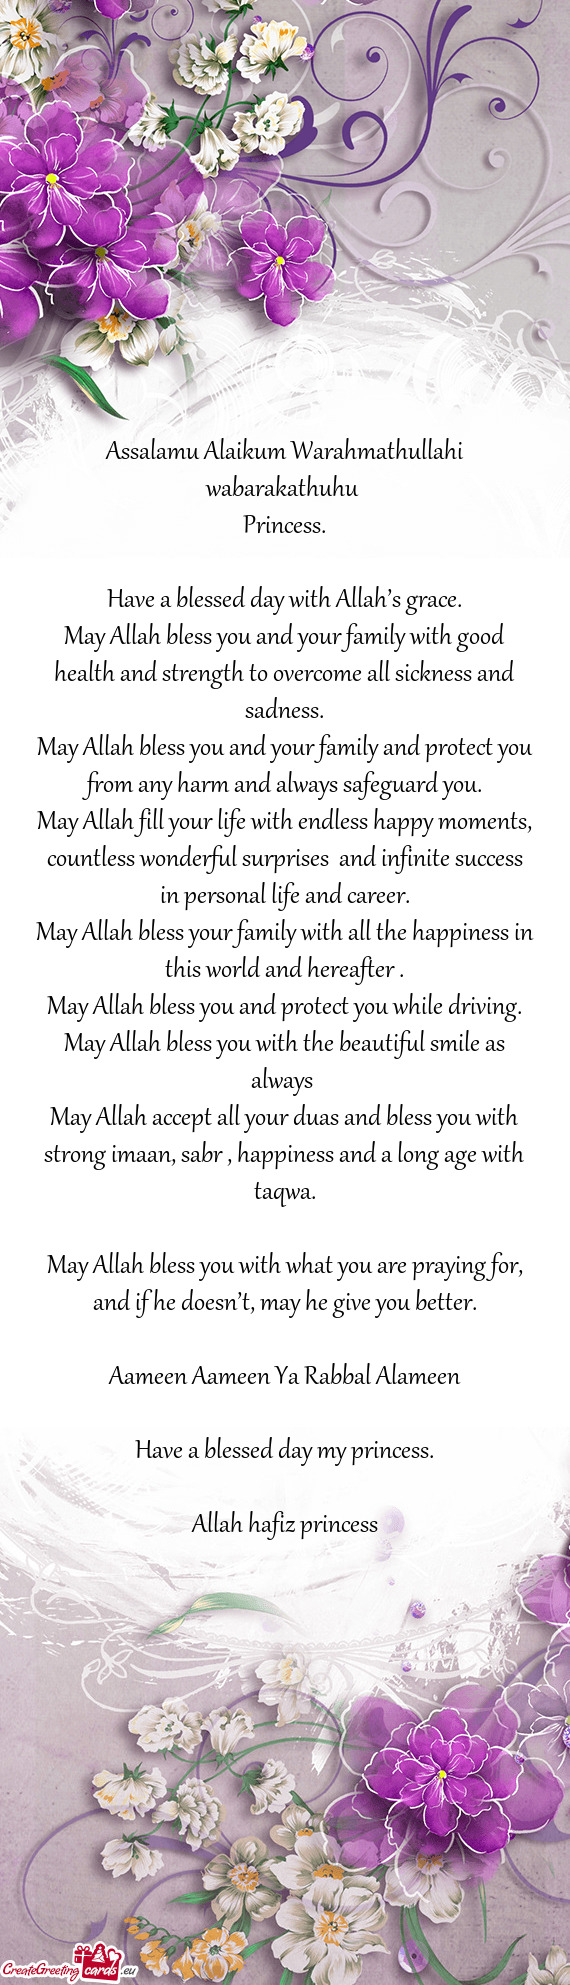 May Allah bless you and your family and protect you from any harm ...